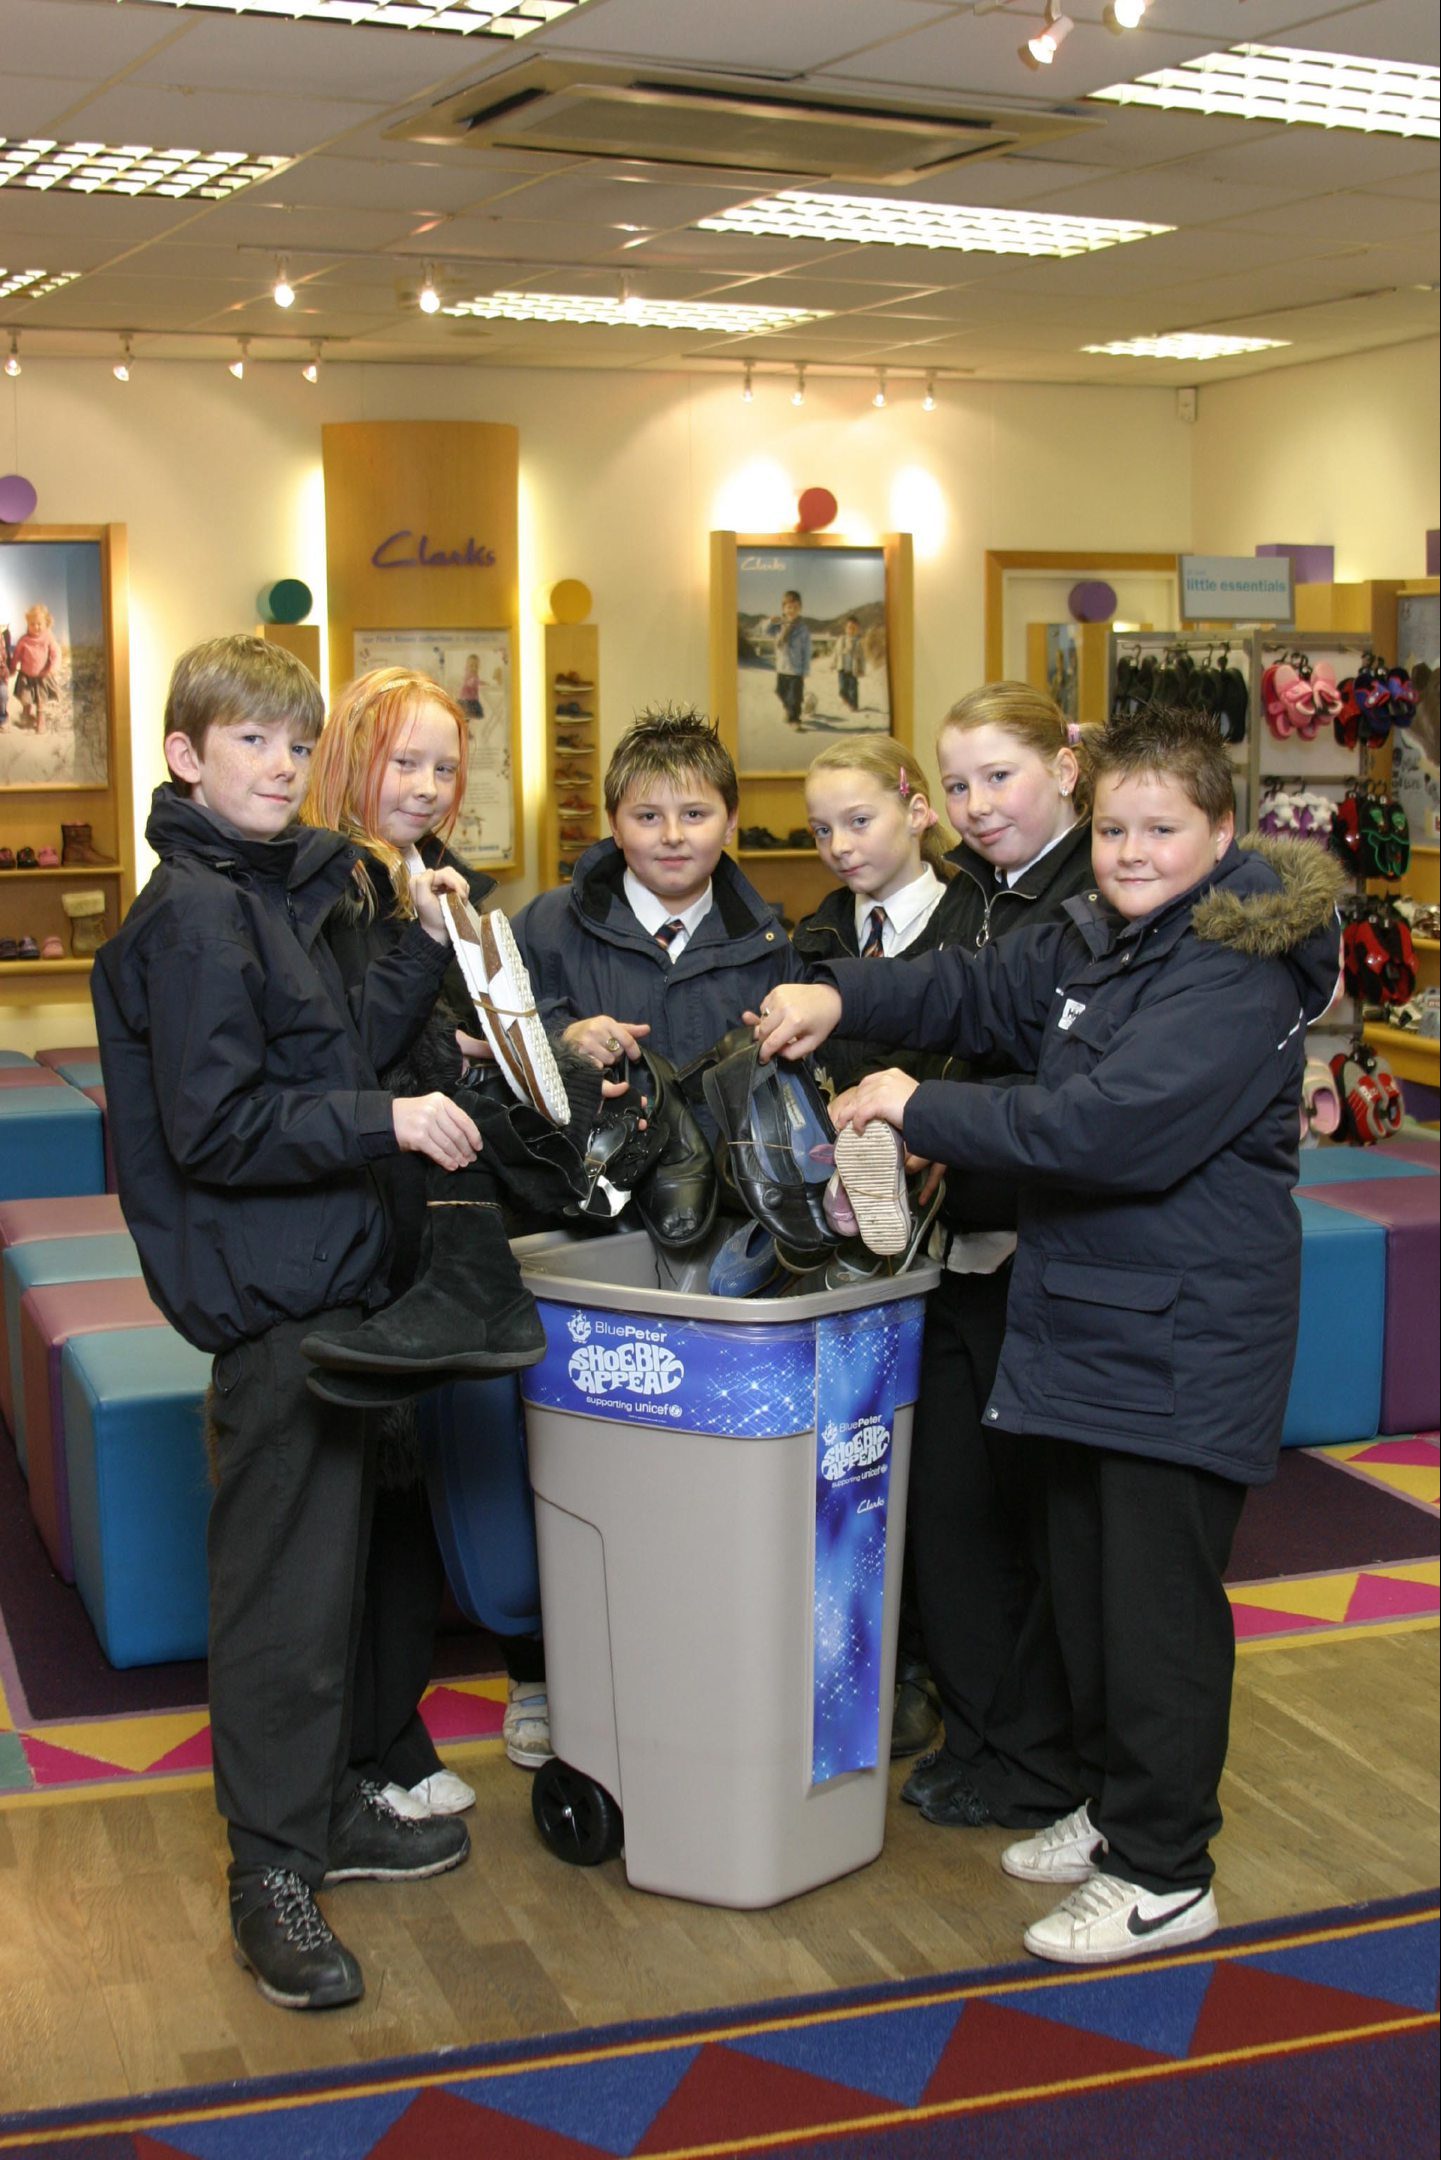 Whitfield Primary pupils handed over 300 pairs of shoes in 2006. Some are pictured putting shoes in a collection bin.